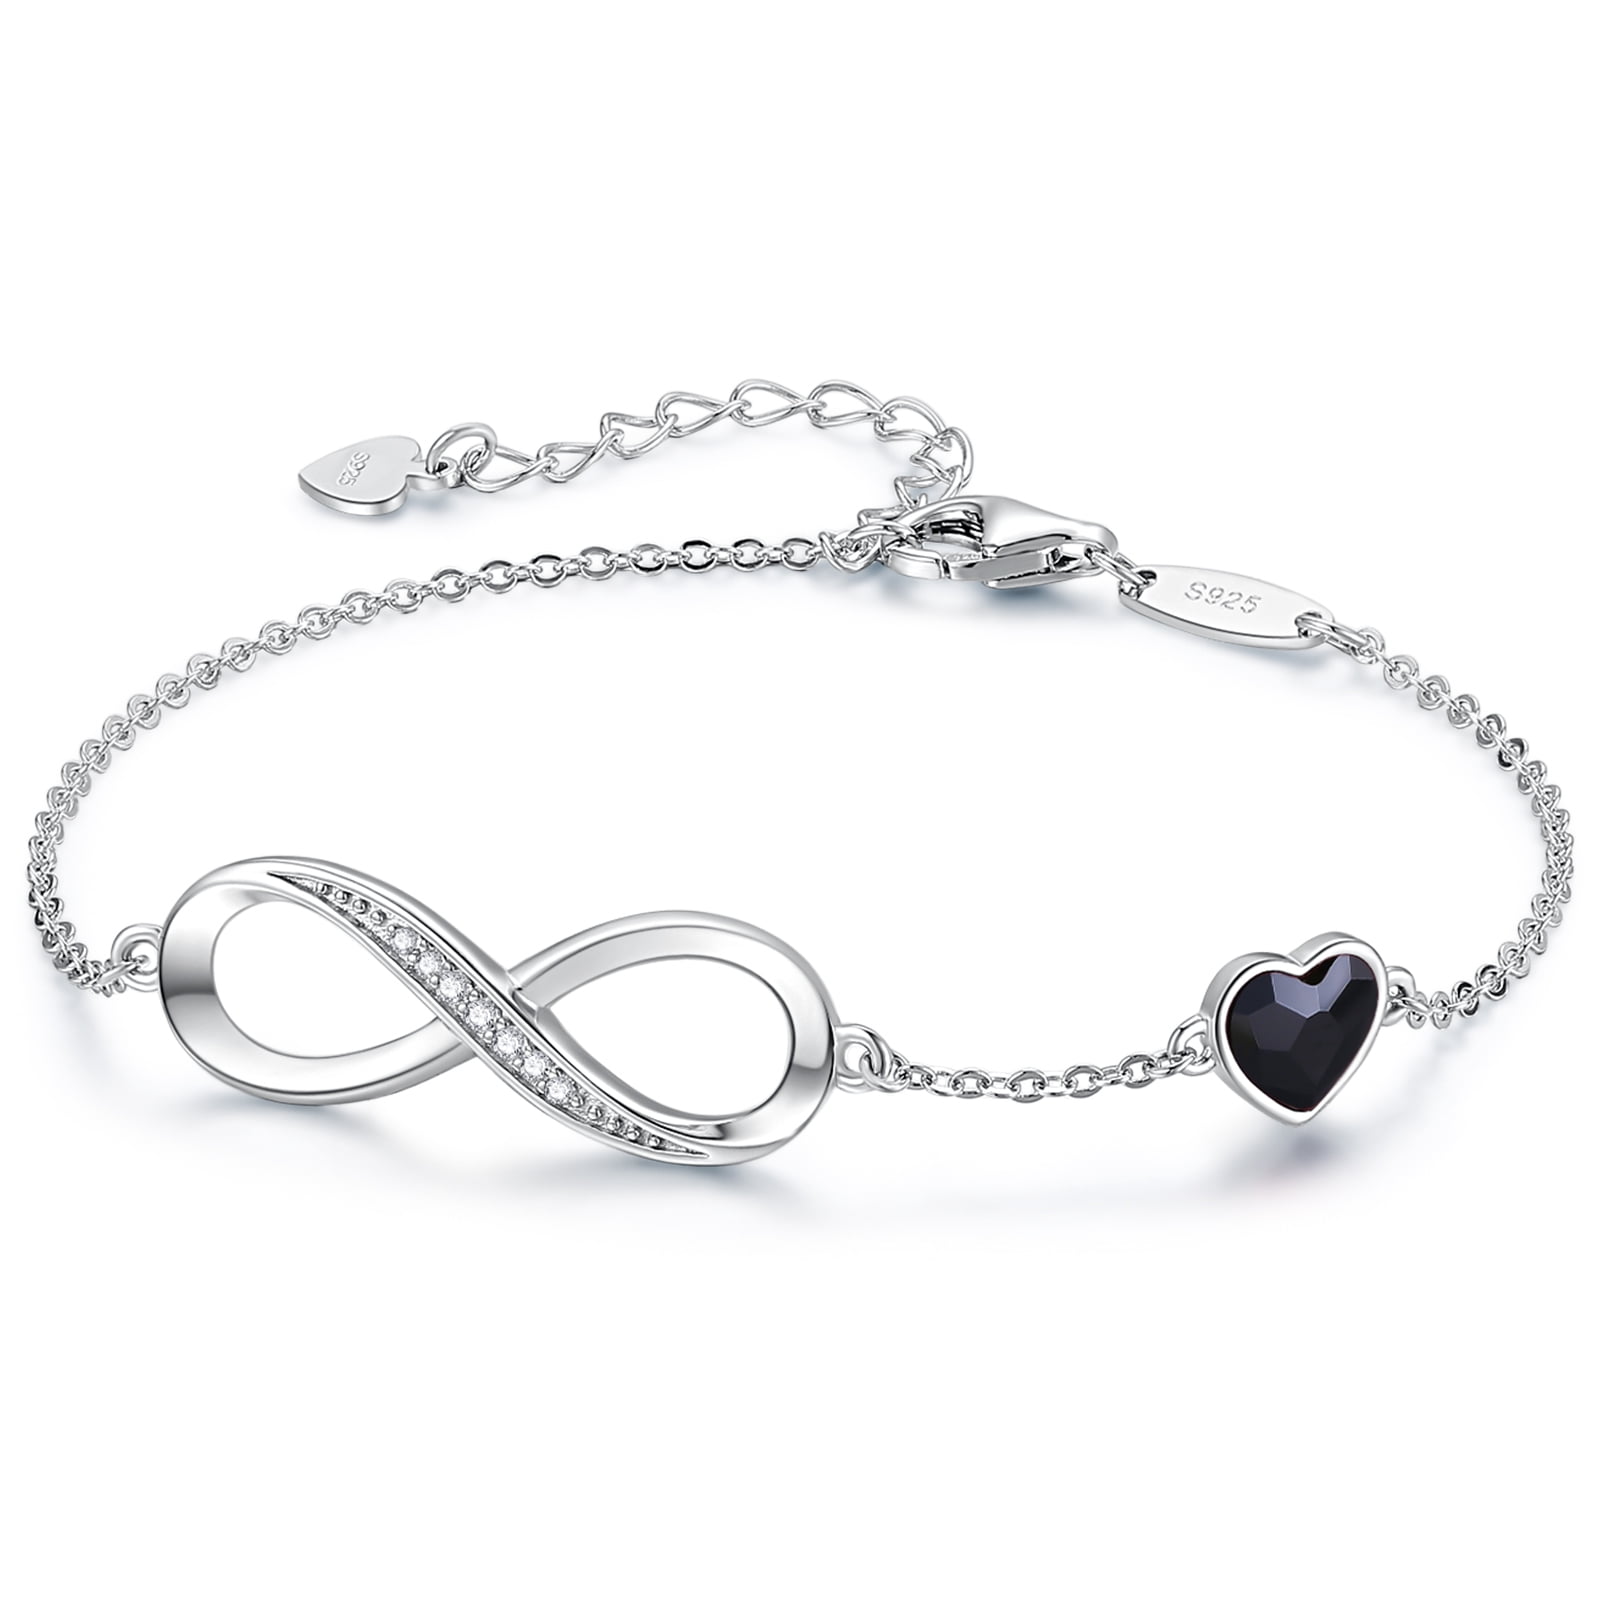 CDE 925 Sterling Silver Bracelet for Women Infinity Heart Symbol Charm  Adjustable Anniversary Jewelry Best Gift Ideas for Women Fine Packing Gift  Box